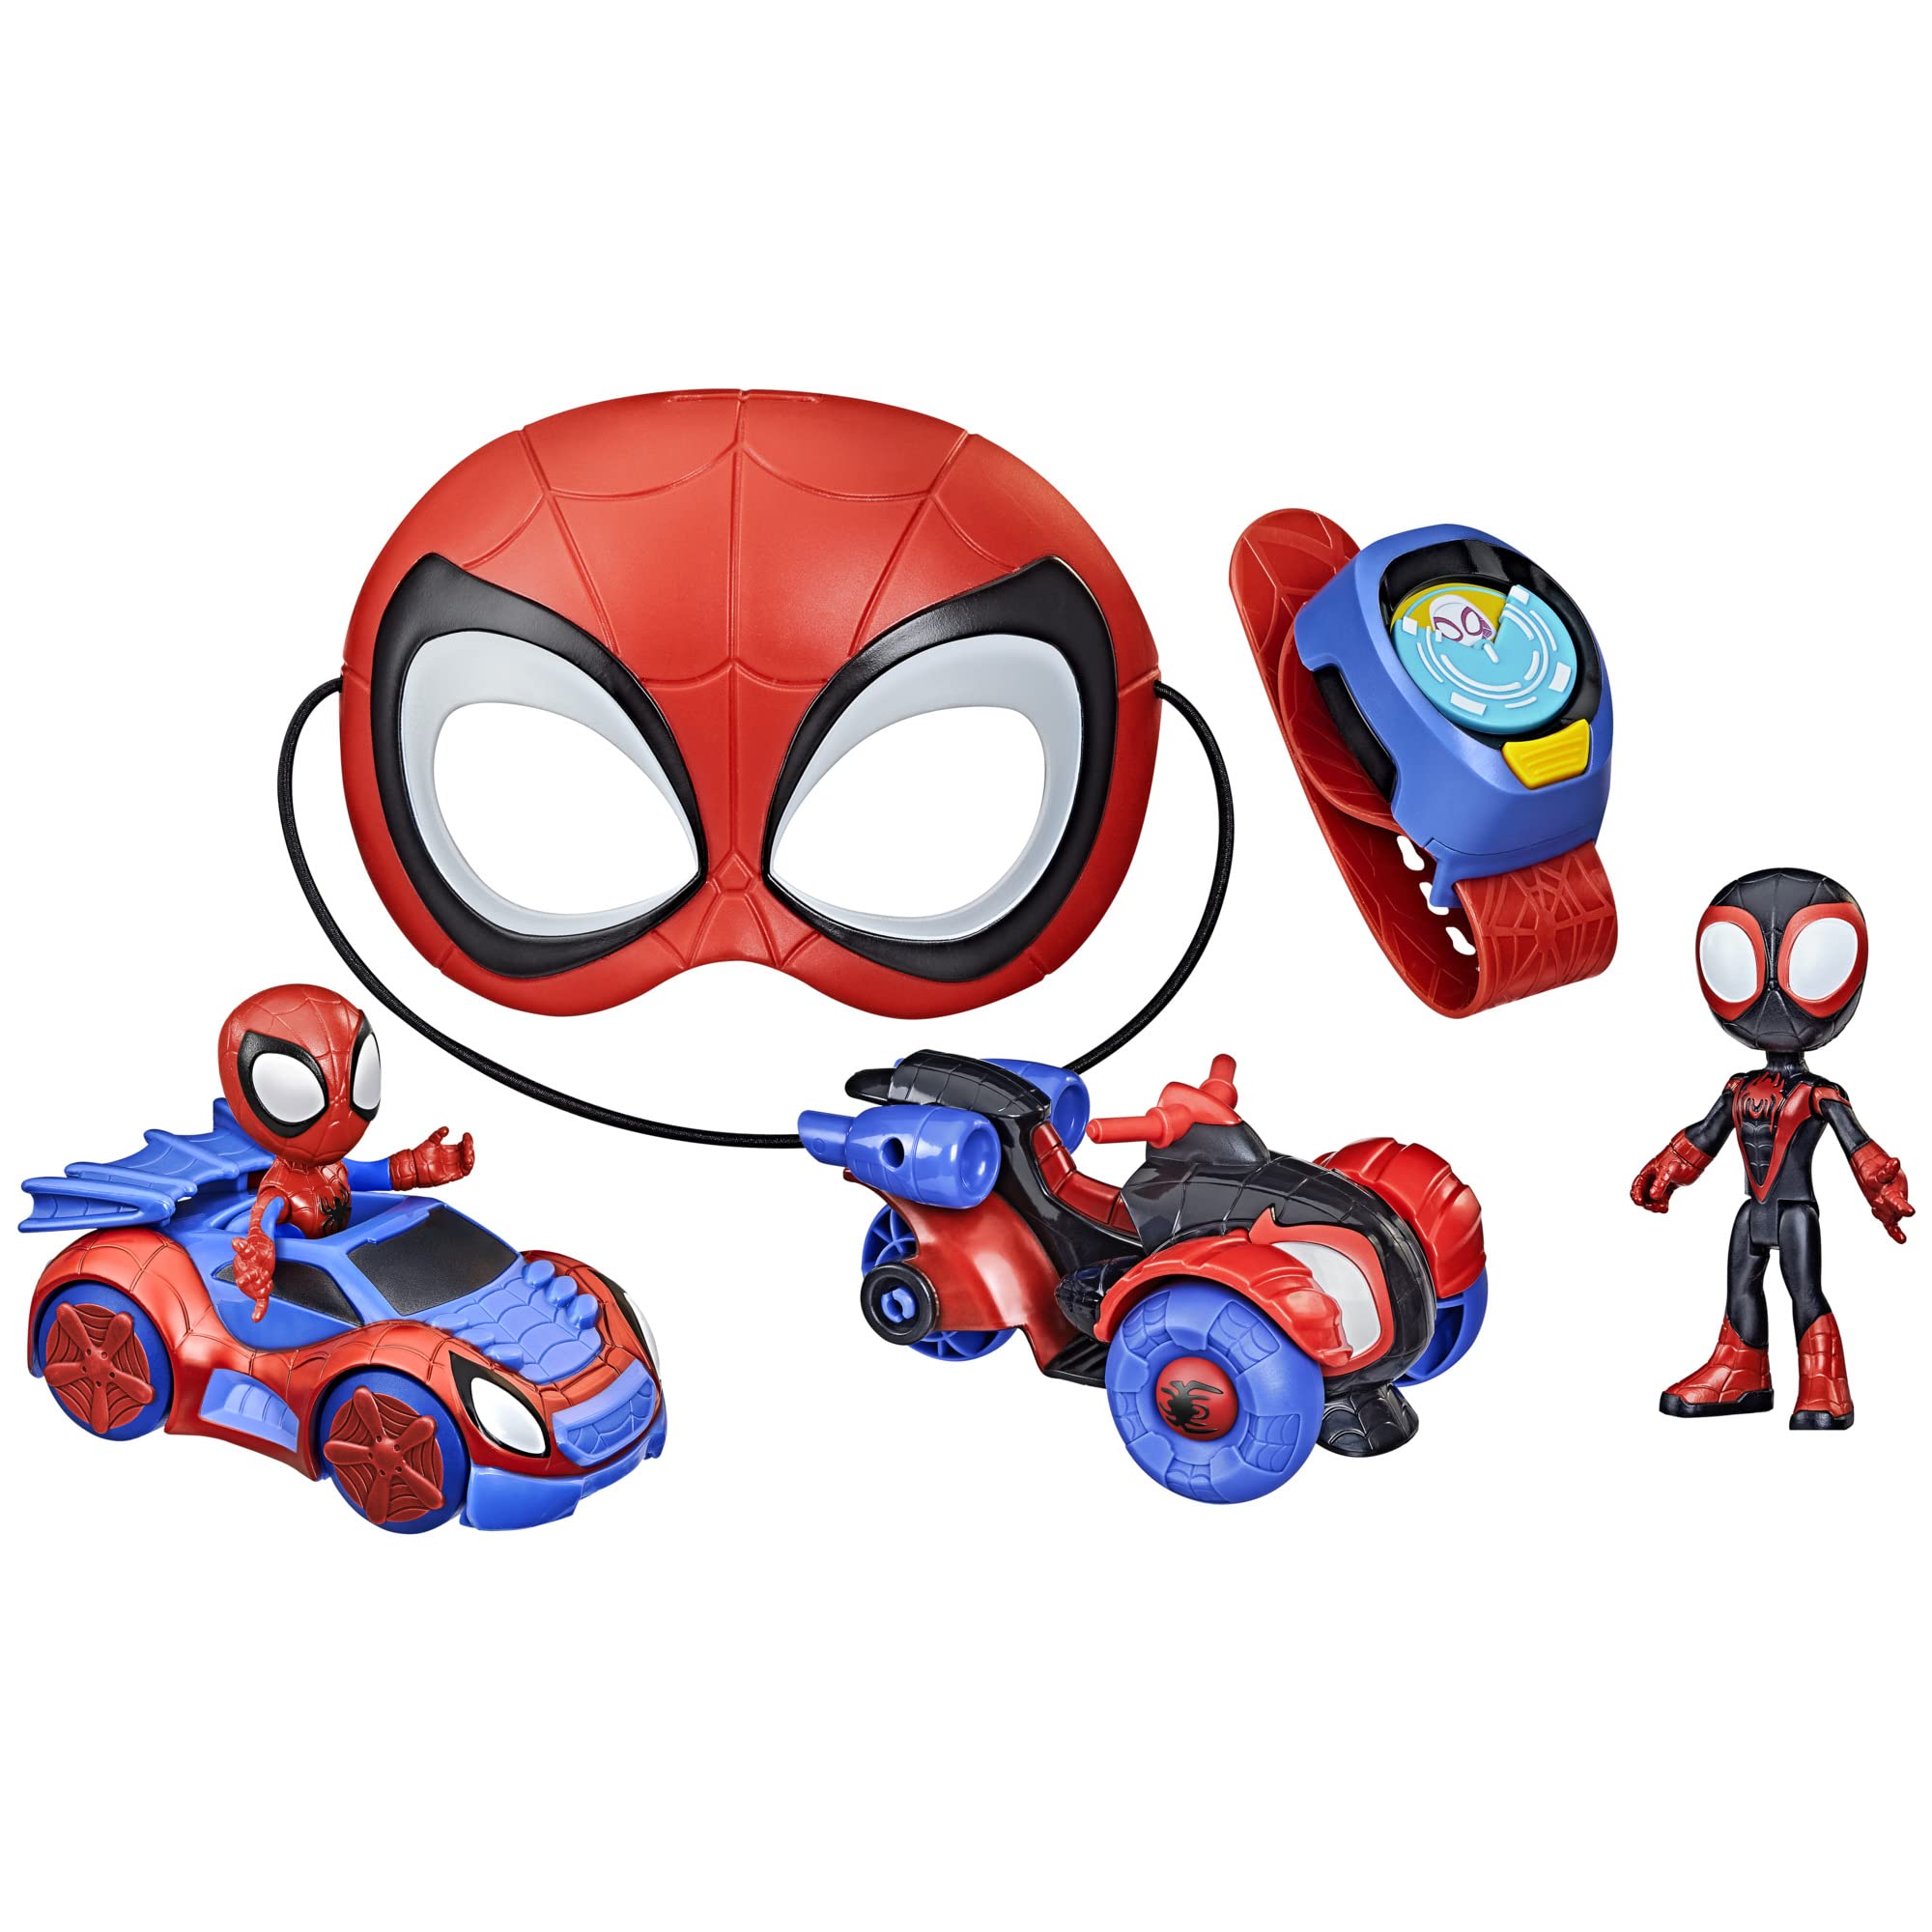 Marvel Hasbro Spidey and His Amazing Friends Super Spidey Set, Role Play Toys, Toy Car Set, Spider-Man Mask, Spidey and His Amazing Friends Figures